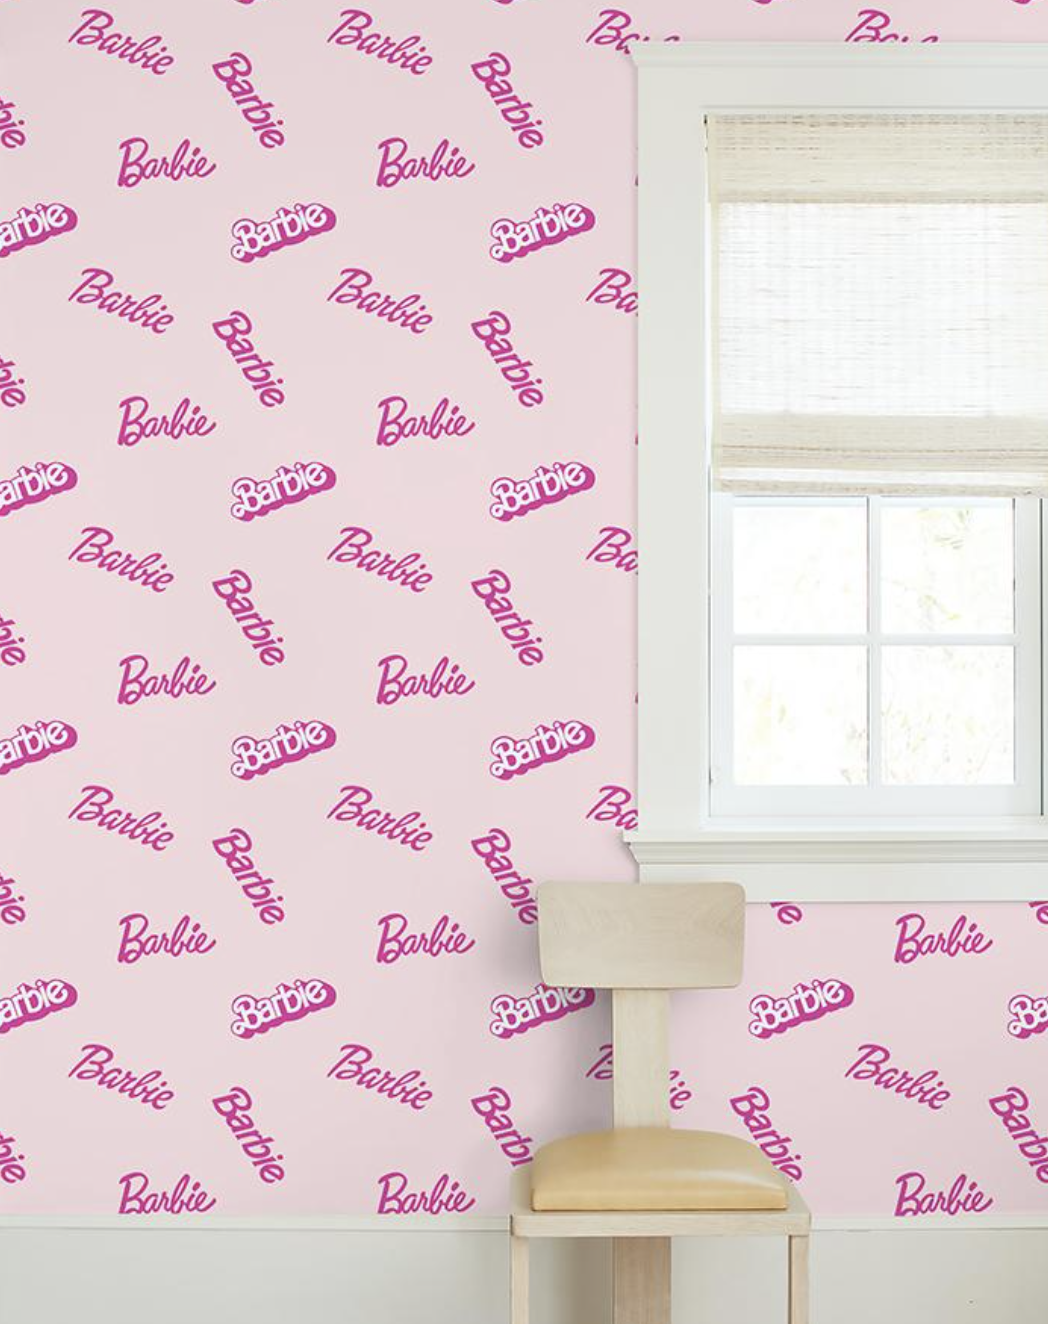 Wallshoppe S New Barbie Wallpaper Is What Childhood Dreams Are Made Of